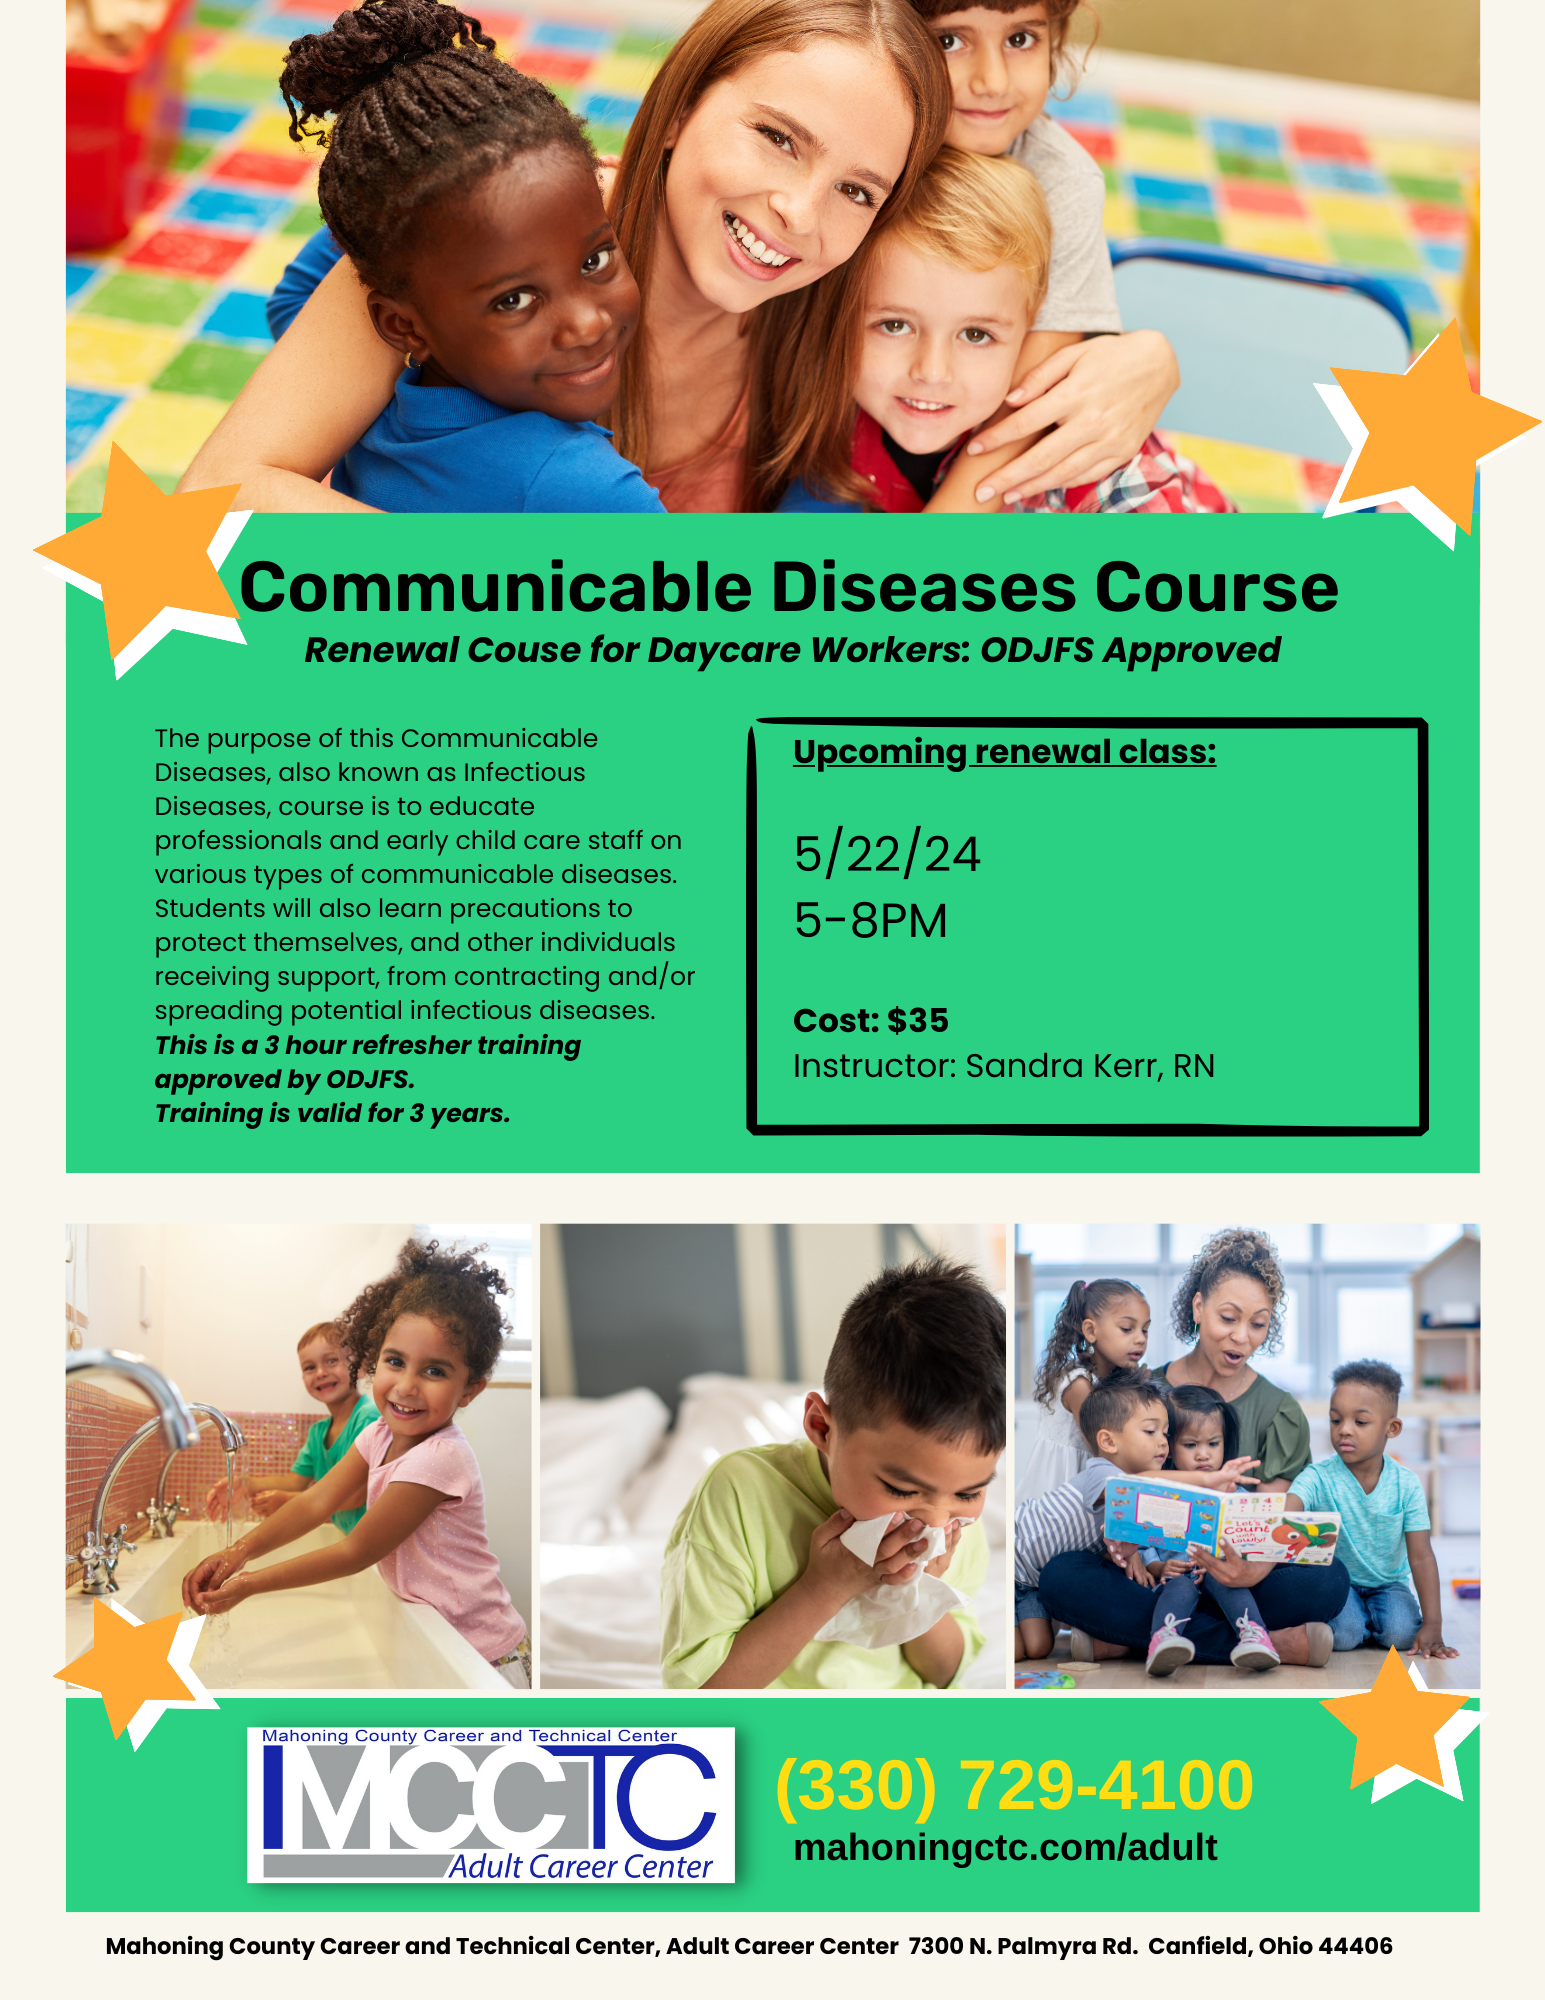 Communicable Diseases Course Starts May 22nd!